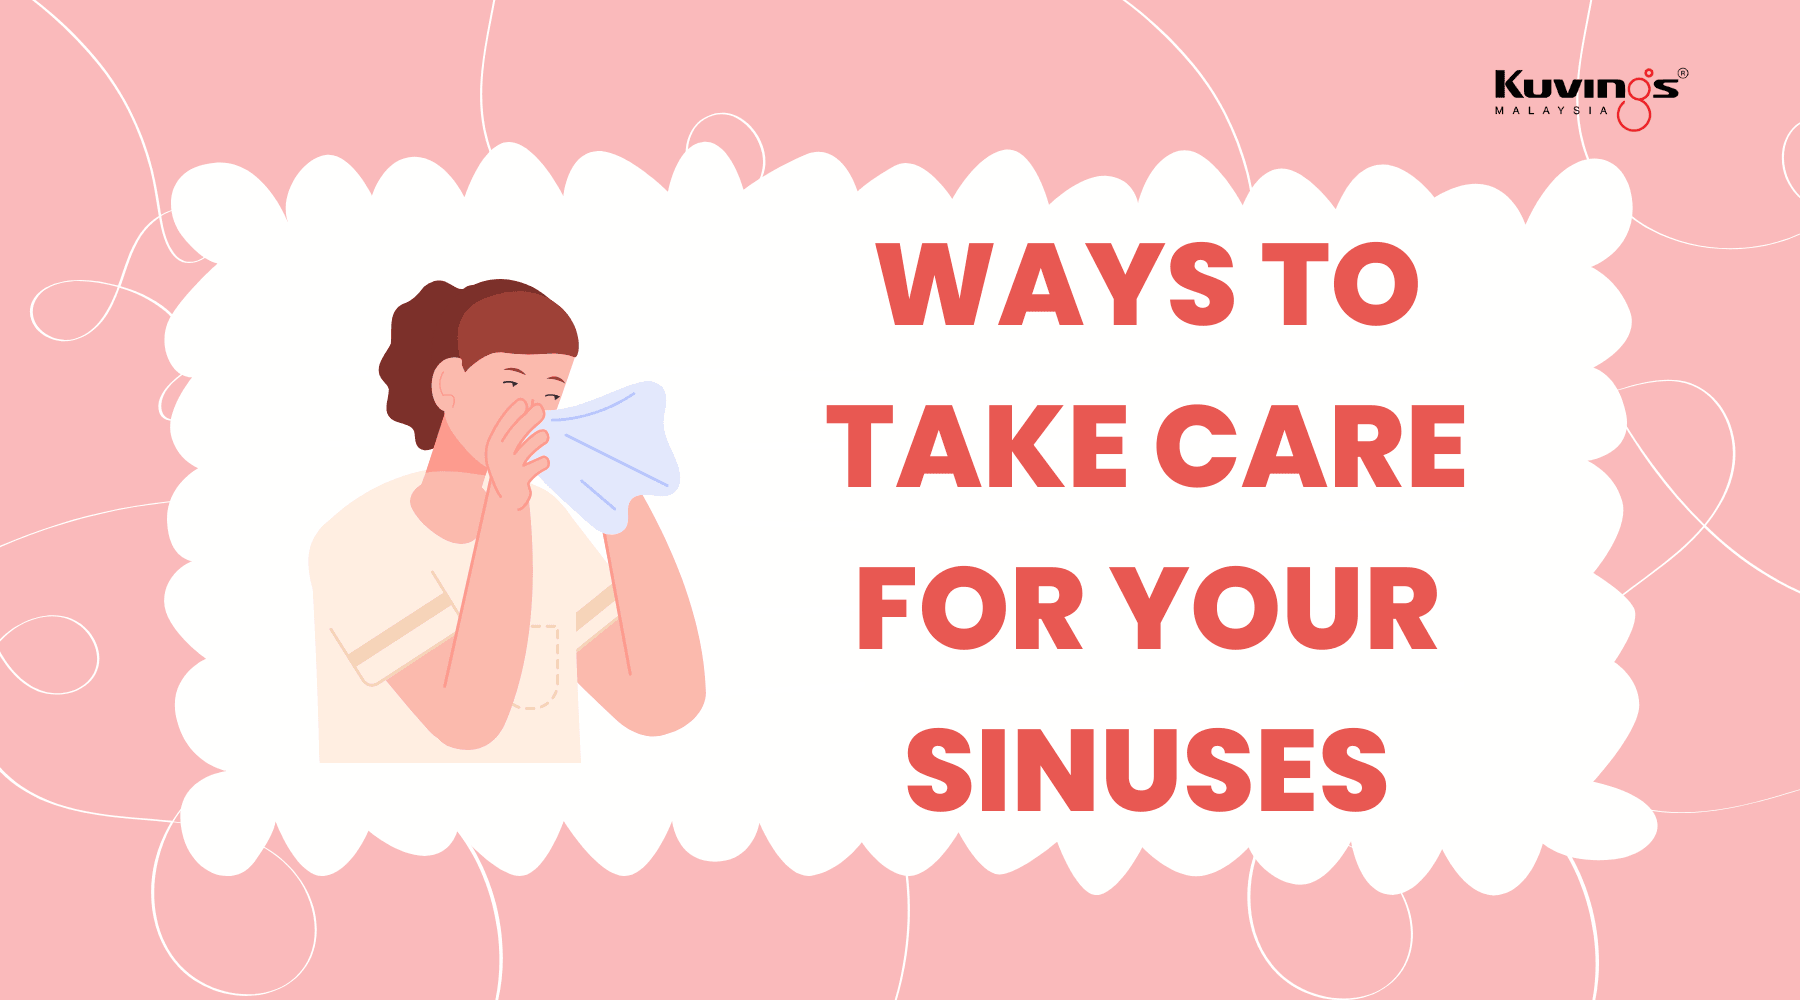 Ways to Take Care of Your Sinuses - Kuvings.my